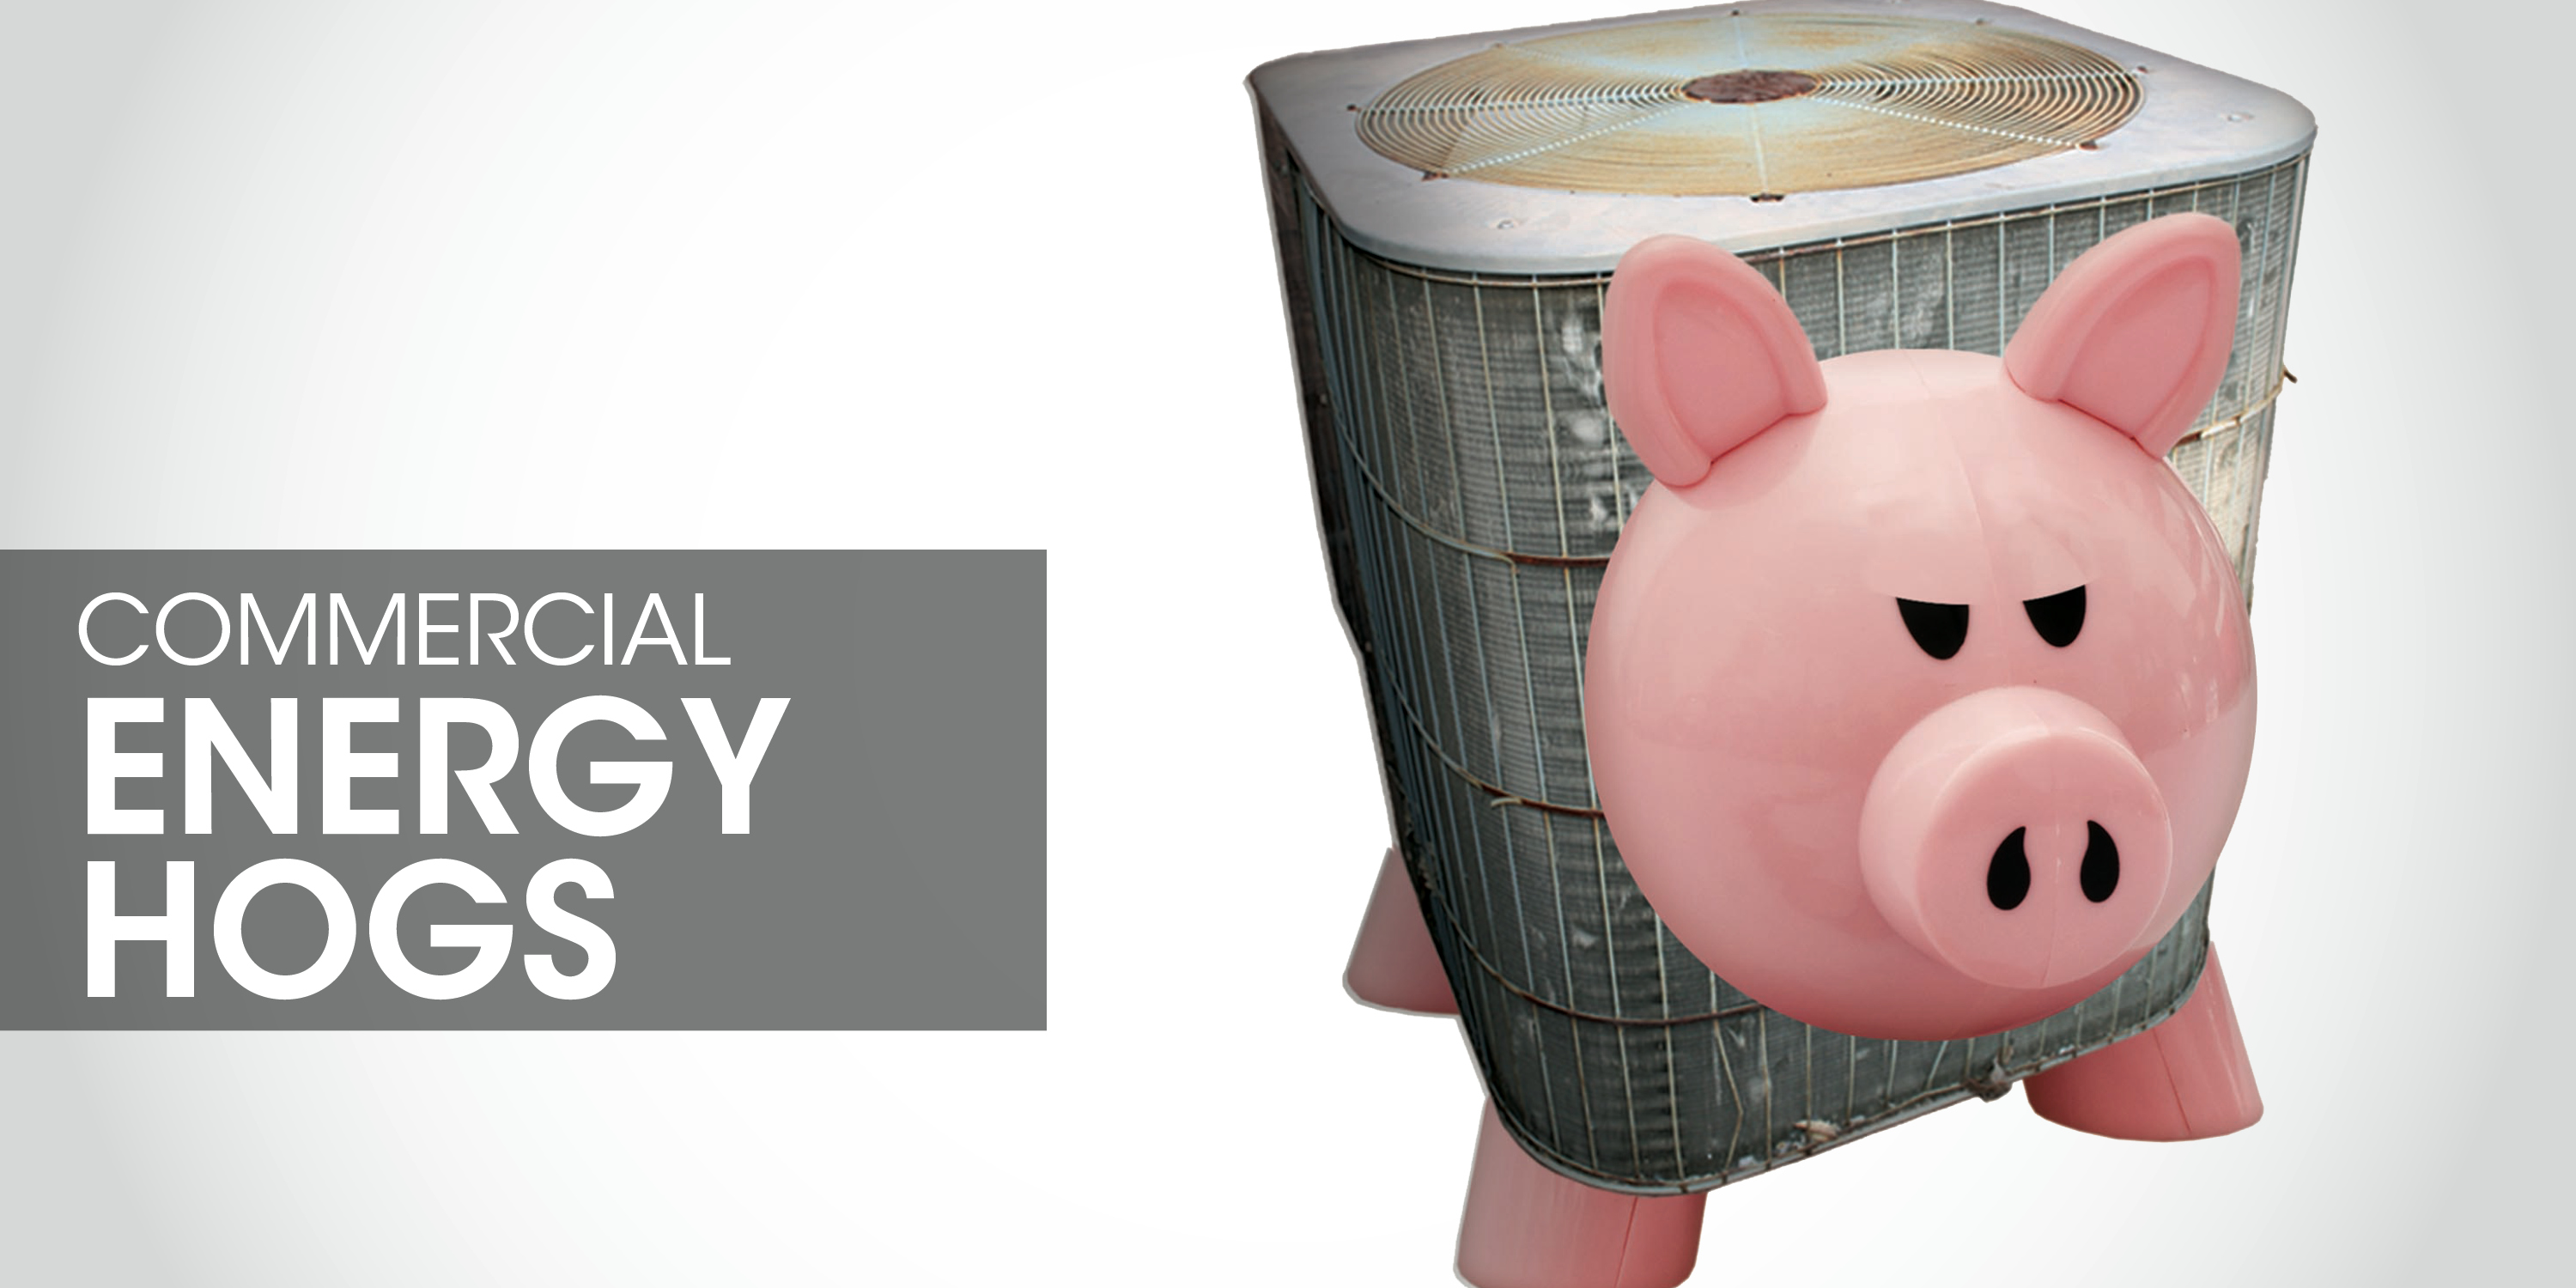 AC piggy bank with text: "Commercial energy hogs"